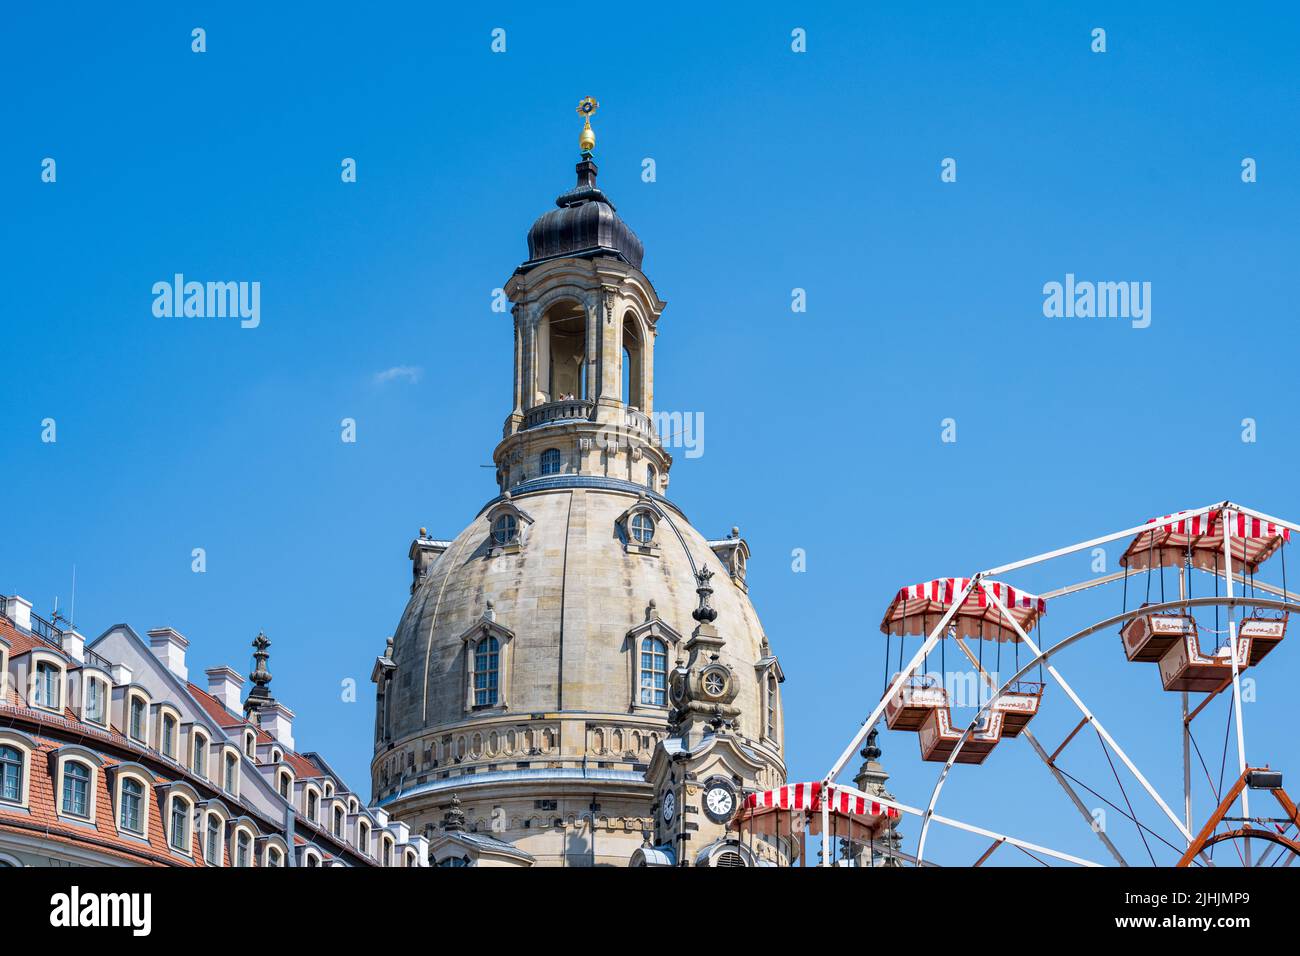 The dome of the Frauenkirche on Neumarkt, the gondolas of a Ferris wheel in the foreground Stock Photo